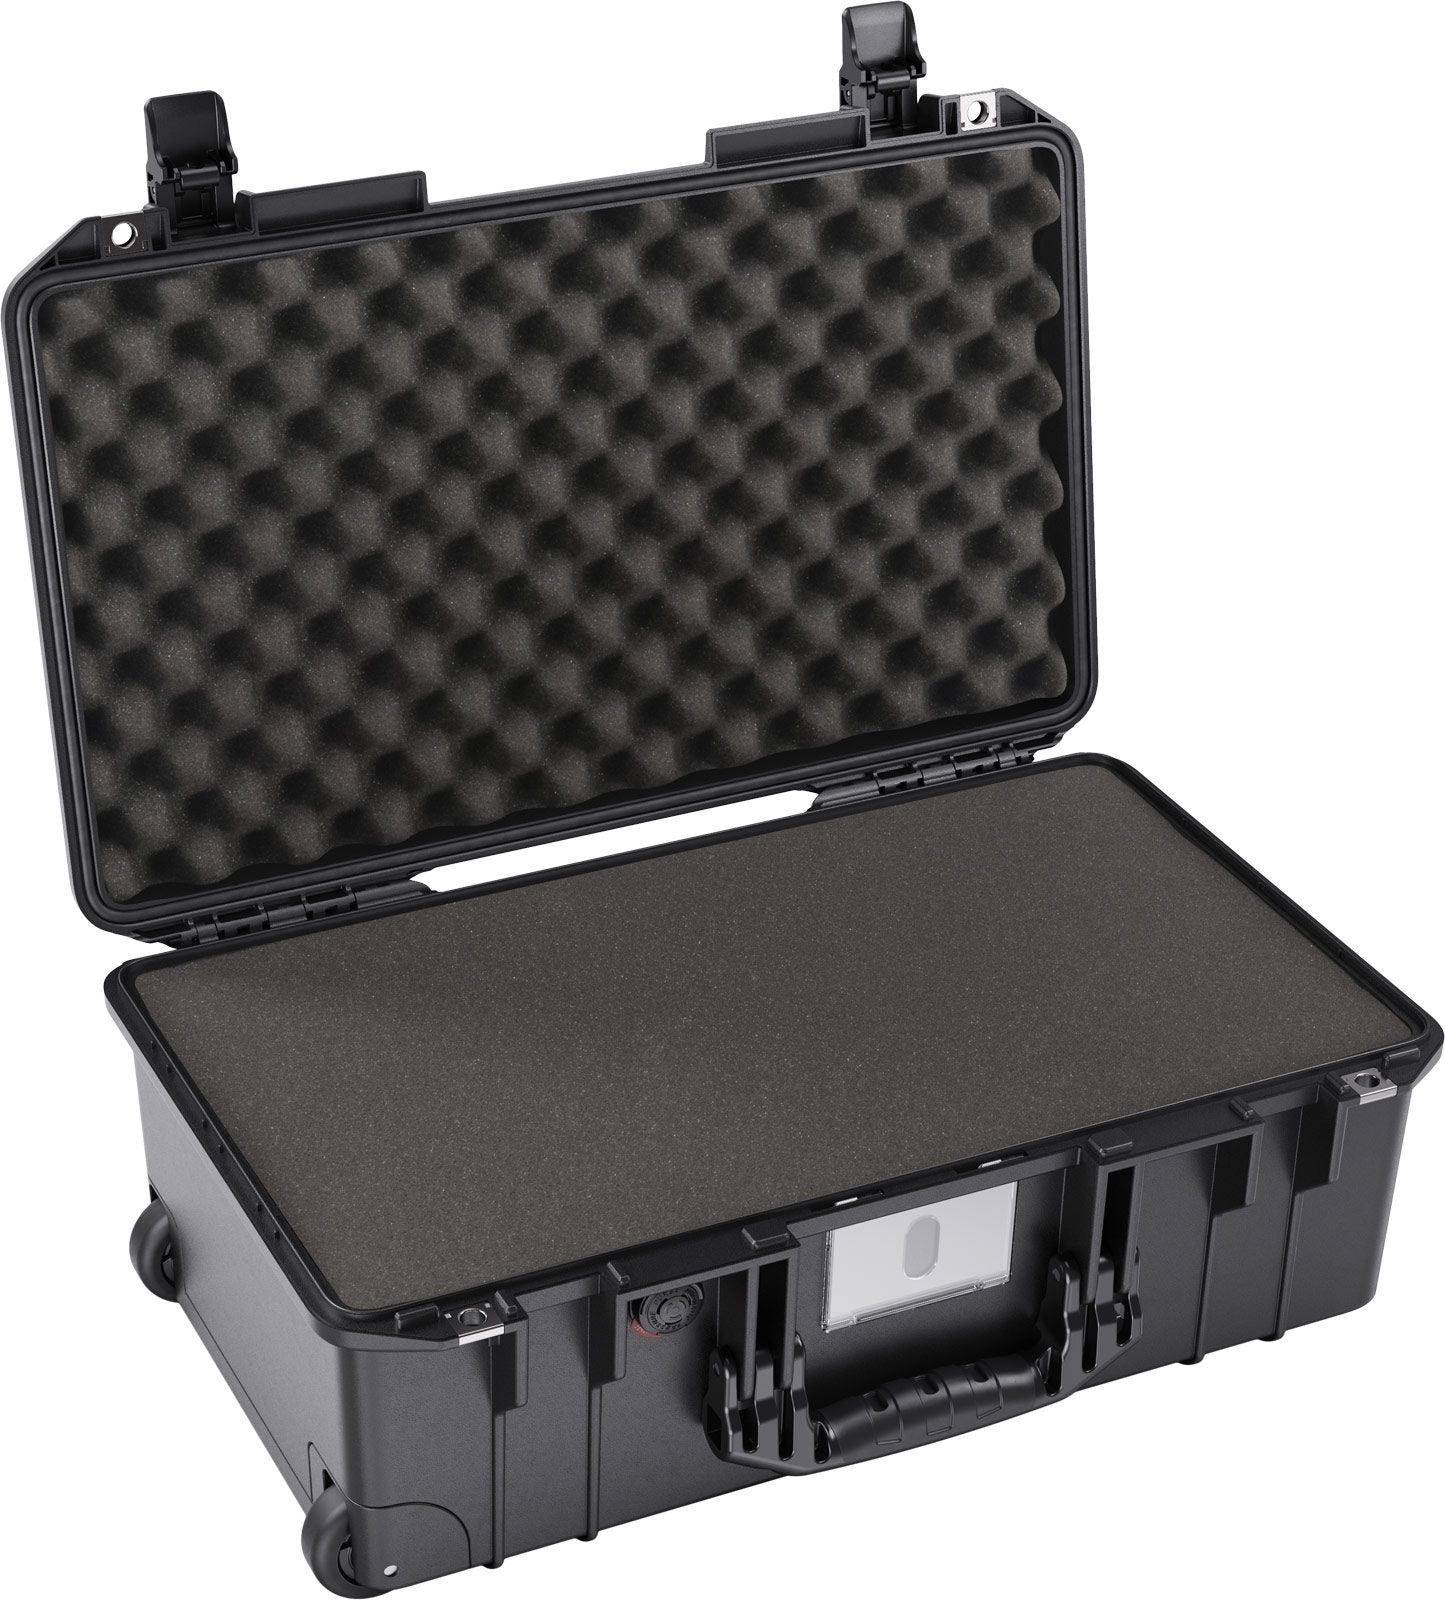 Pelican Products 1535 Air Carry-On Case - Black, Foam